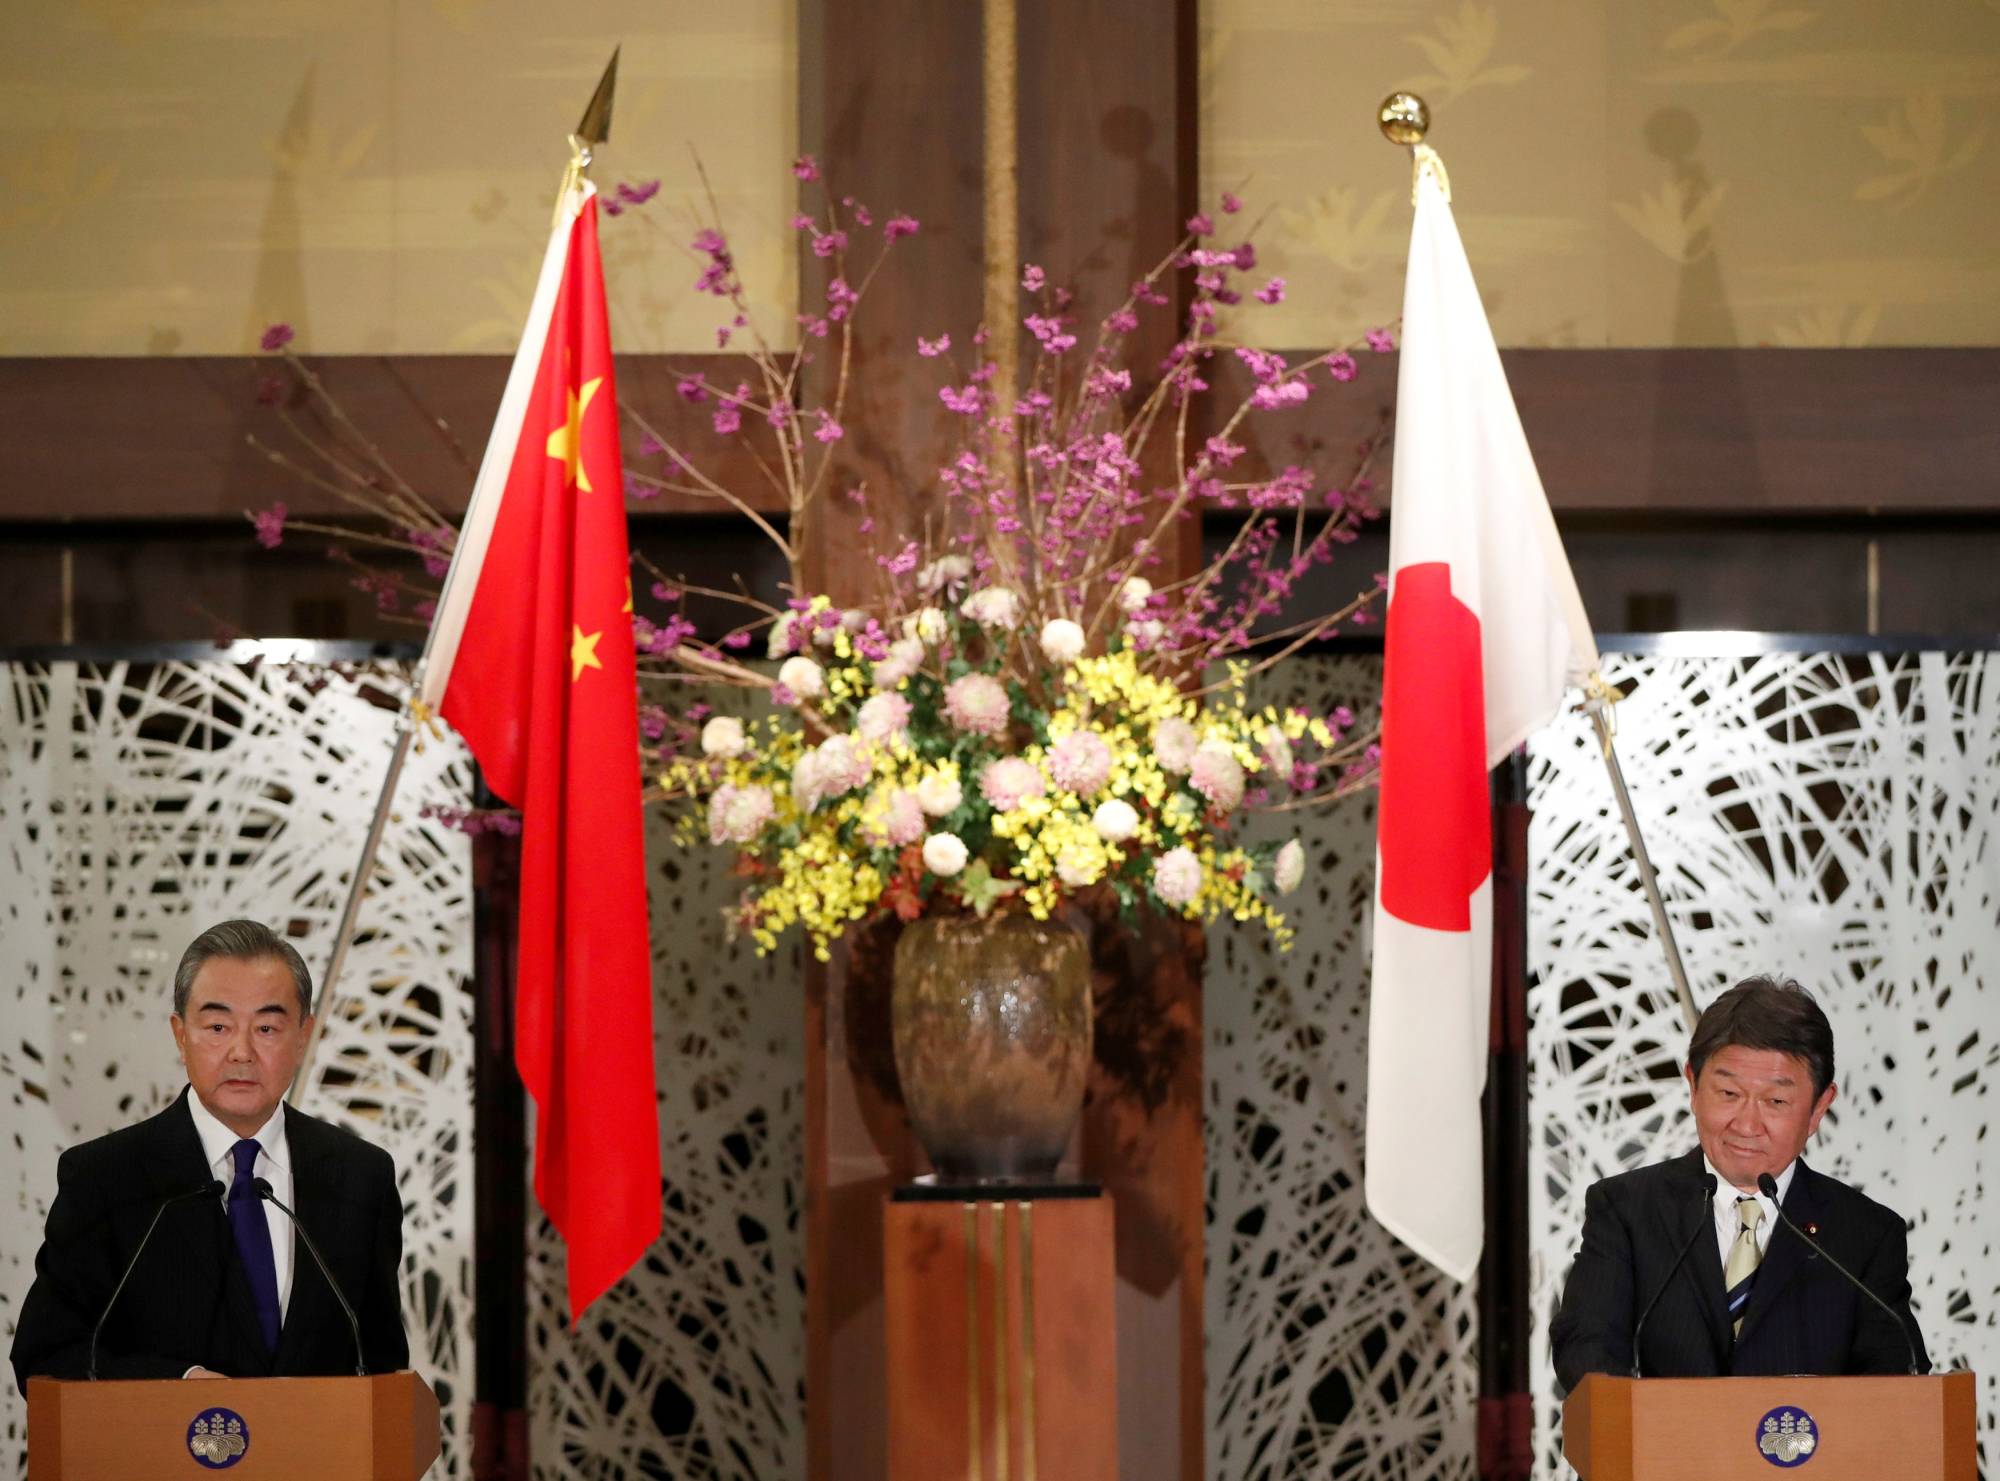 China's State Councilor and Foreign Minister Wang Yi (left) and his counterpart, Foreign Minister Toshimitsu Motegi, hold a joint news conference after their meeting in Tokyo on Tuesday. | POOL / VIA REUTERS 